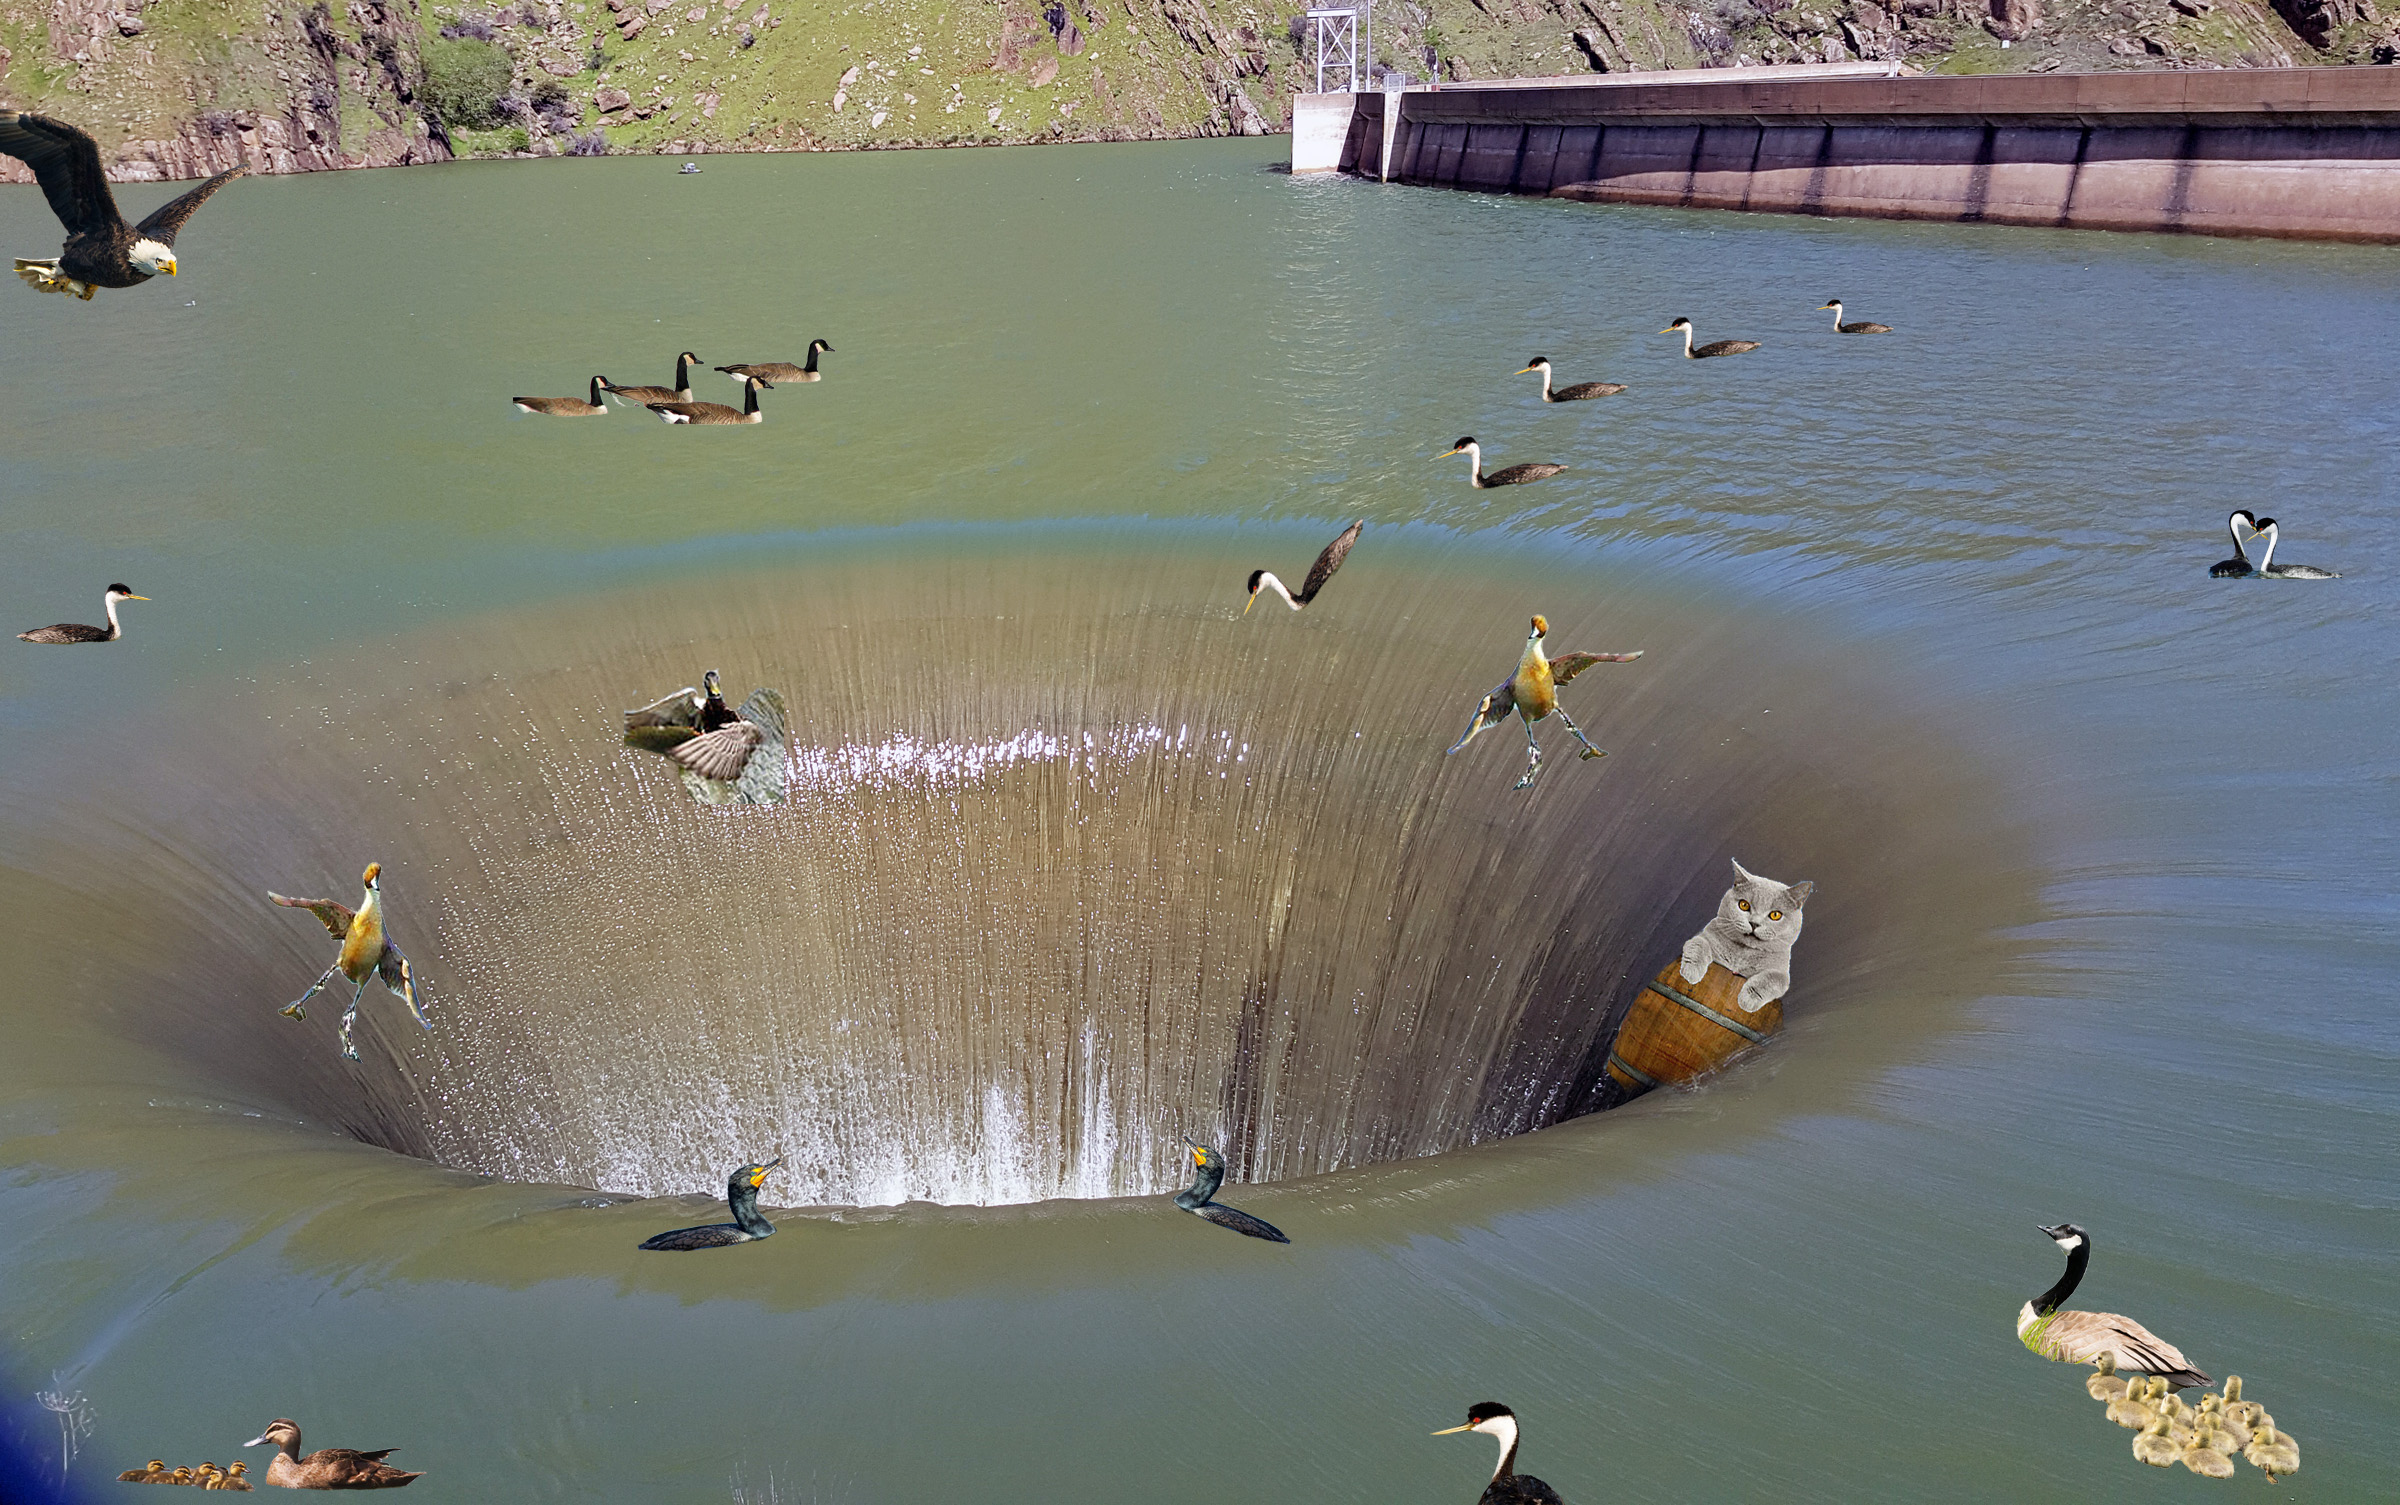 Bird Goes Over the Glory Hole Waterfall Without A Barrel.